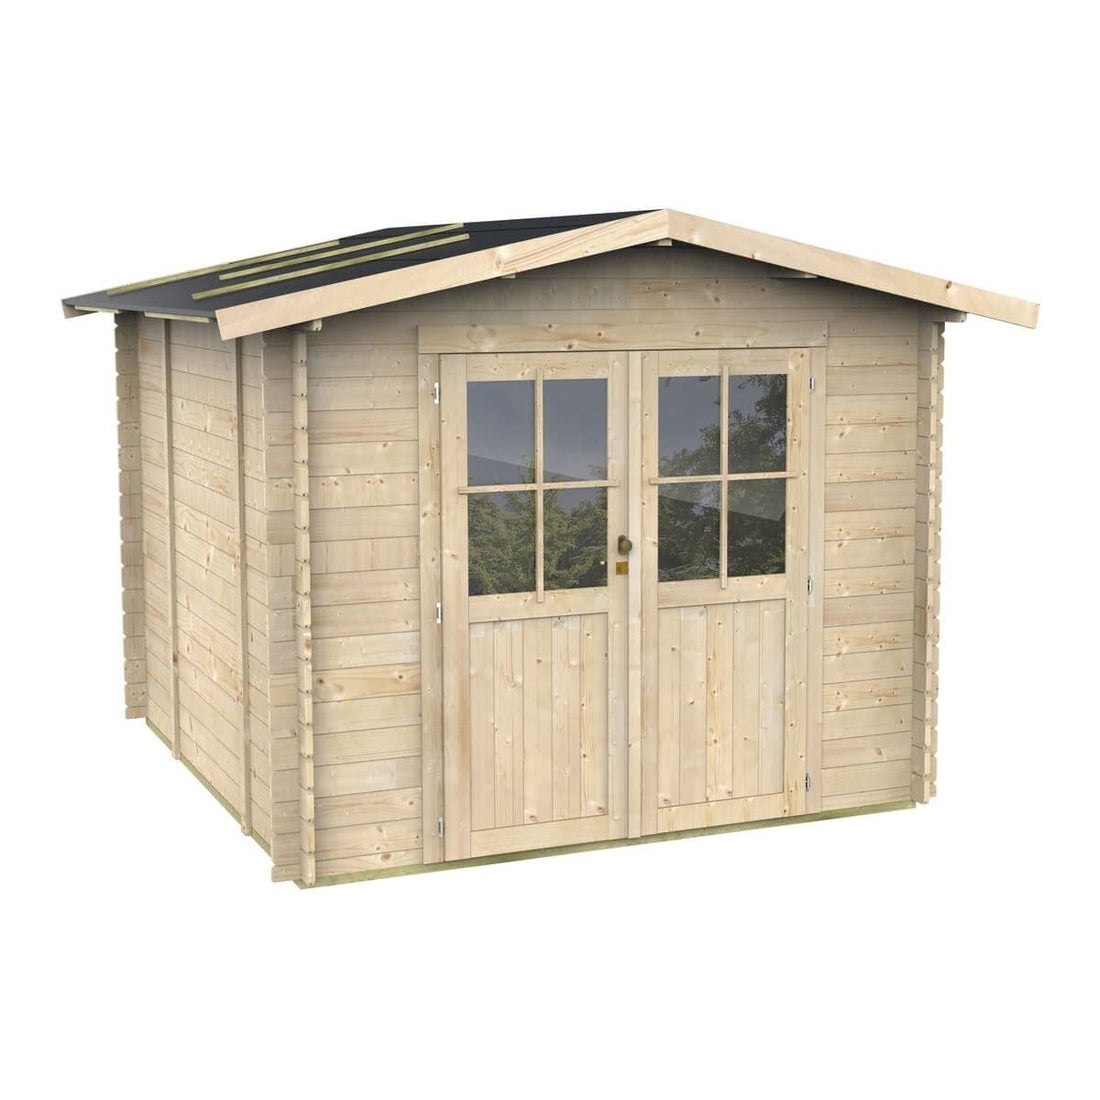 LORY WOODEN HOUSE 25 MM THICK EXTERNAL DIMENSIONS 276X254X218 WITH FLOOR INCLUDED - best price from Maltashopper.com BR500013452